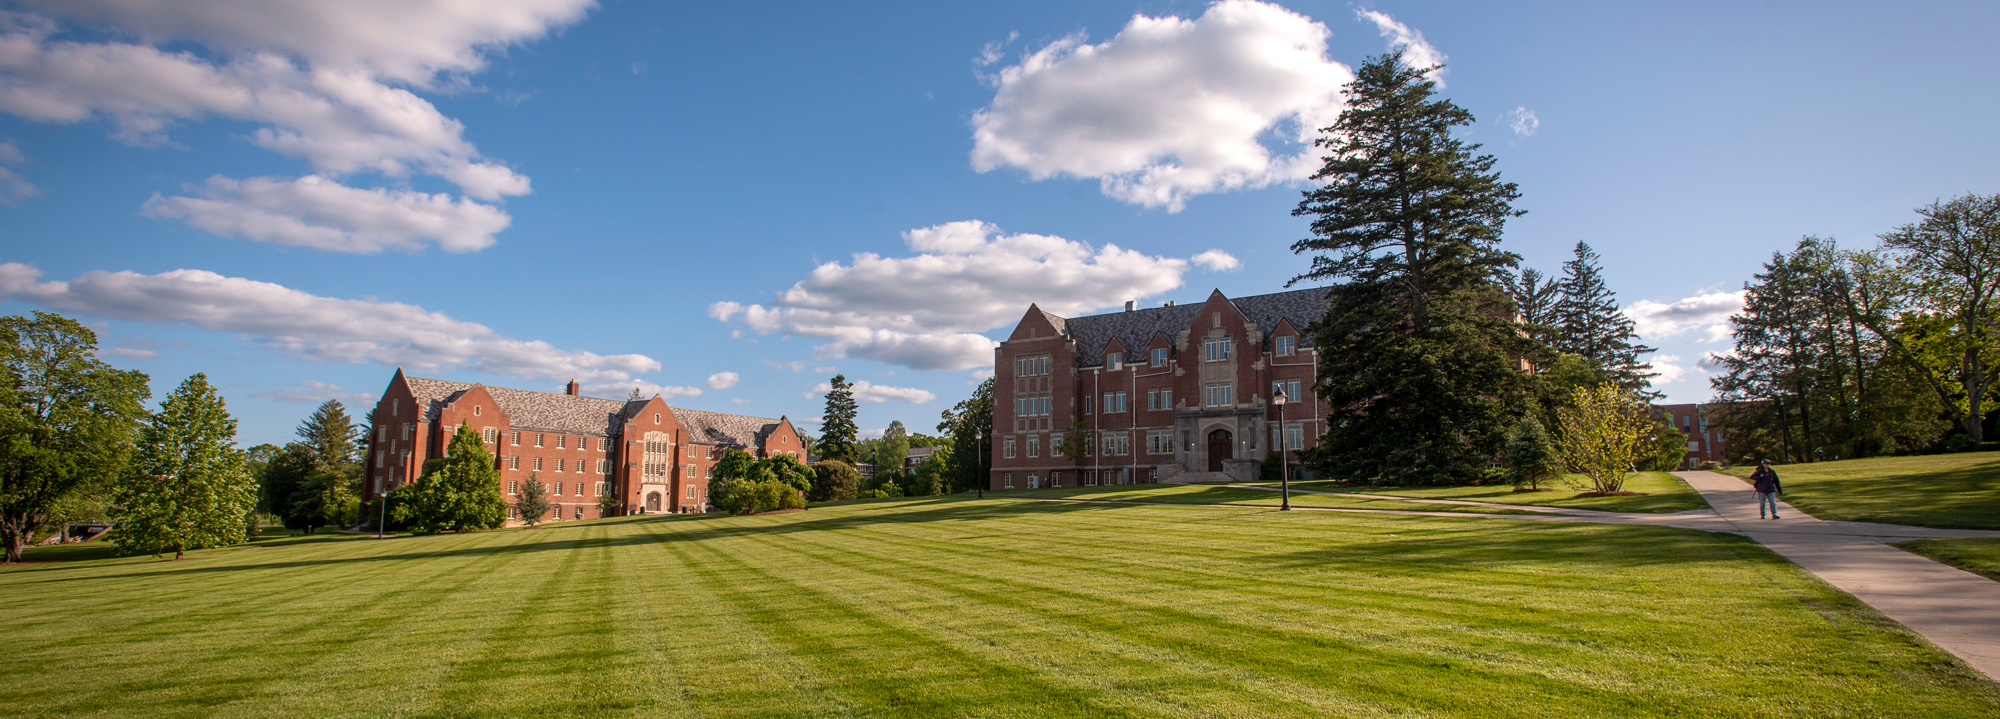 Panoramic view of the great Lawn showing Manchester Hall and the Family Studies building 